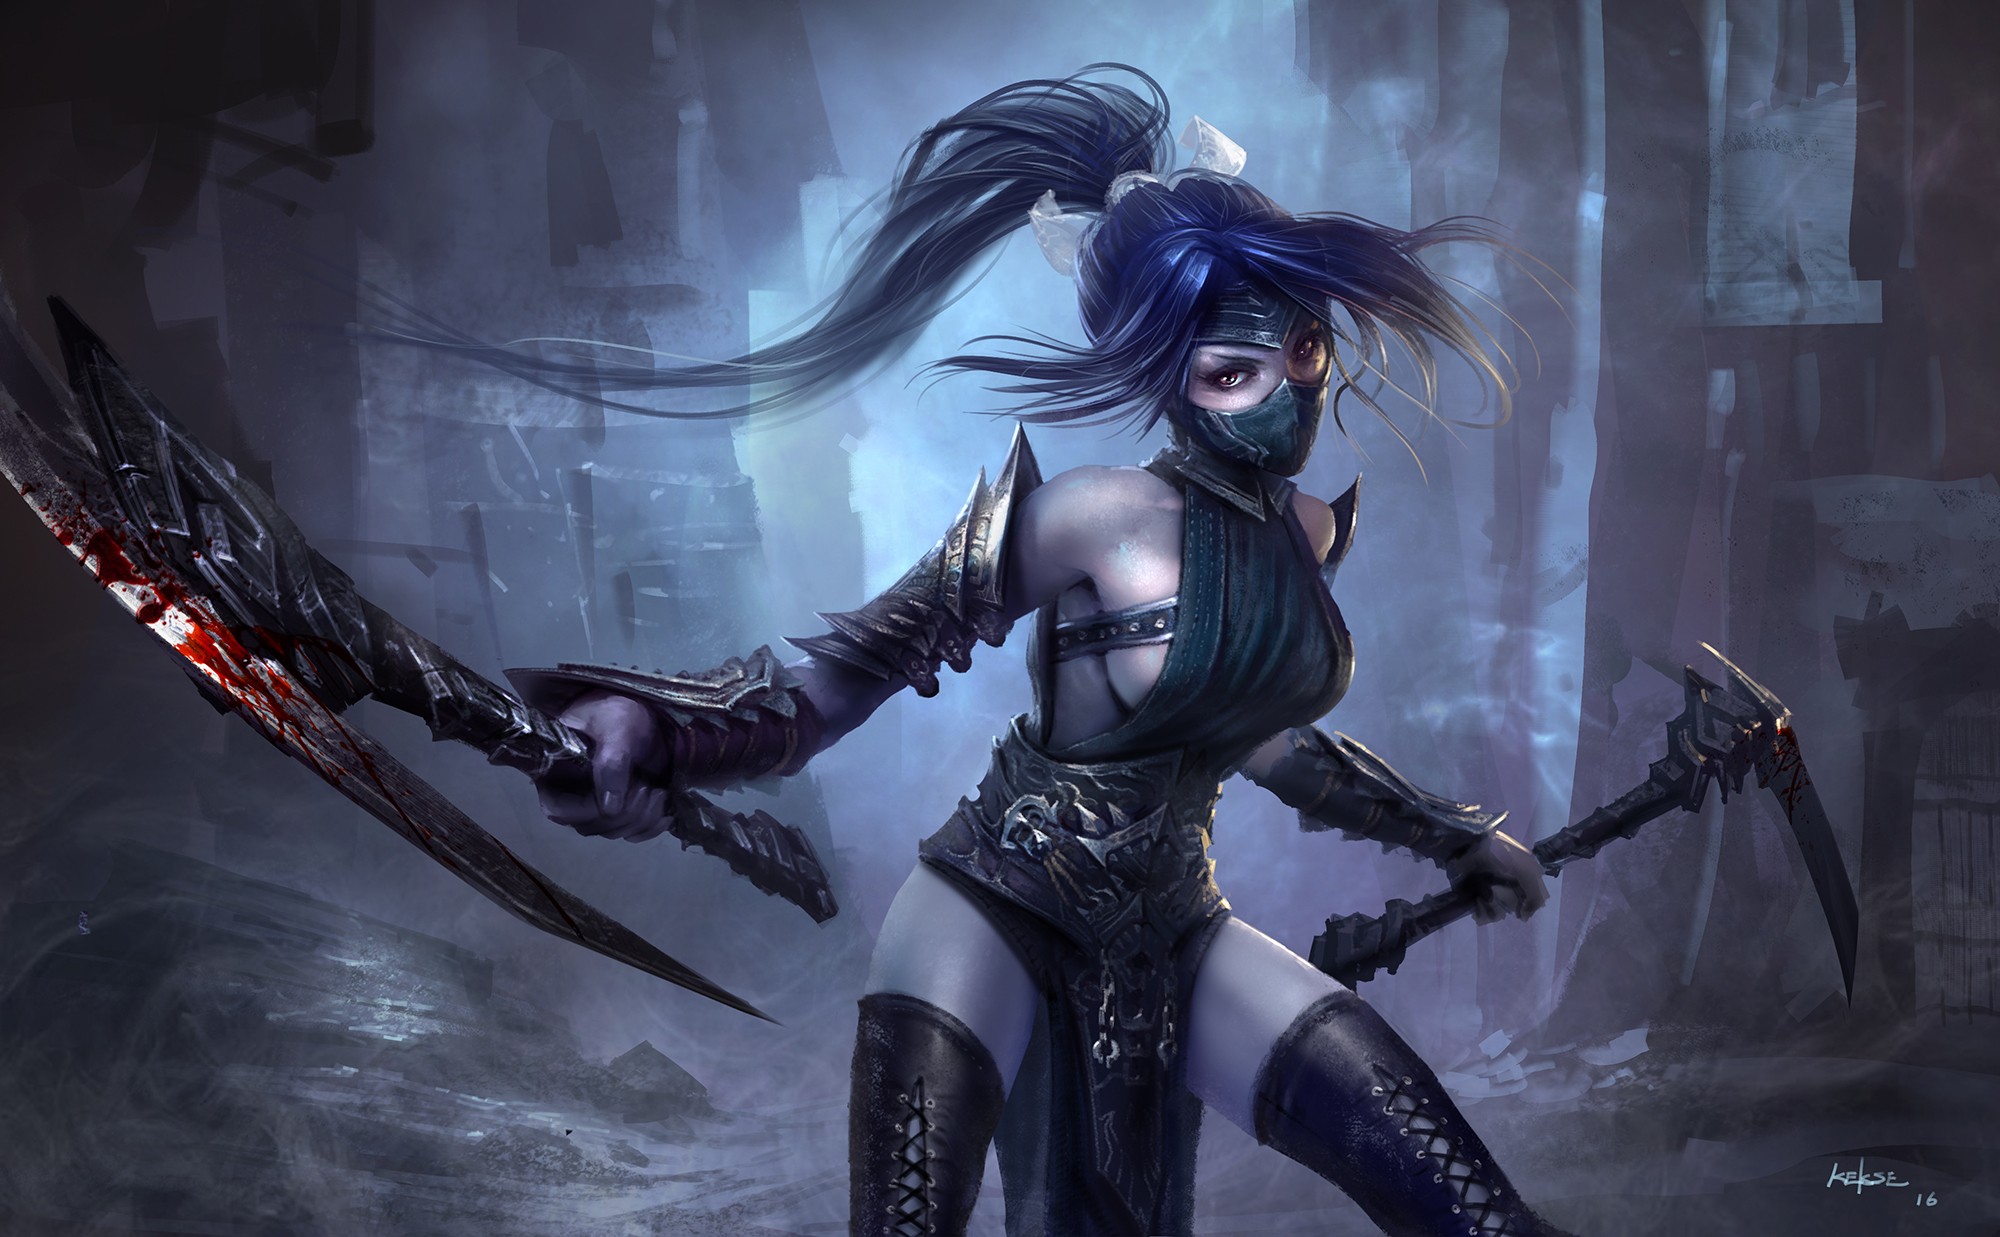 General 2000x1237 anime anime girls League of Legends Akali (League of Legends) armor blood long hair mask sideboob weapon women video game girls DeviantArt video game characters PC gaming watermarked blue hair